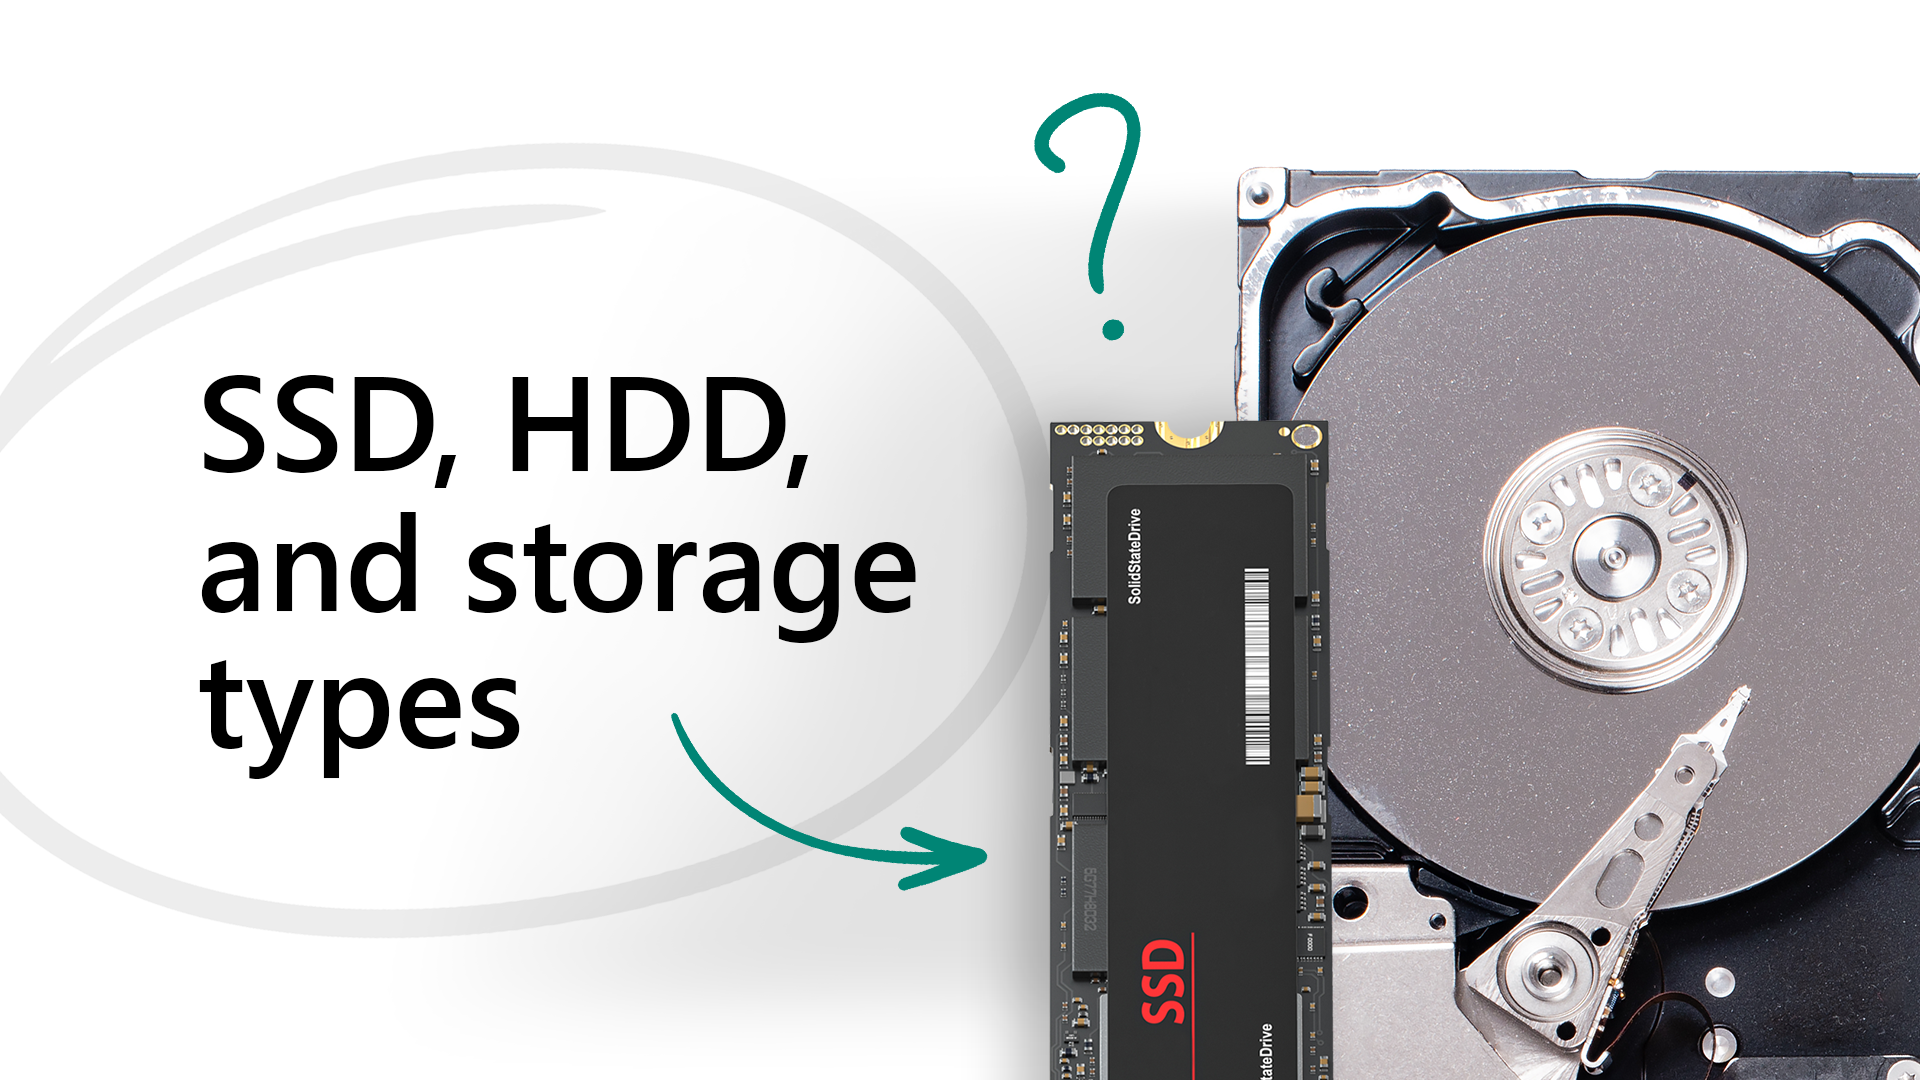 wiel glas dood gaan All about SSD, HDD, and storage types - Microsoft Support